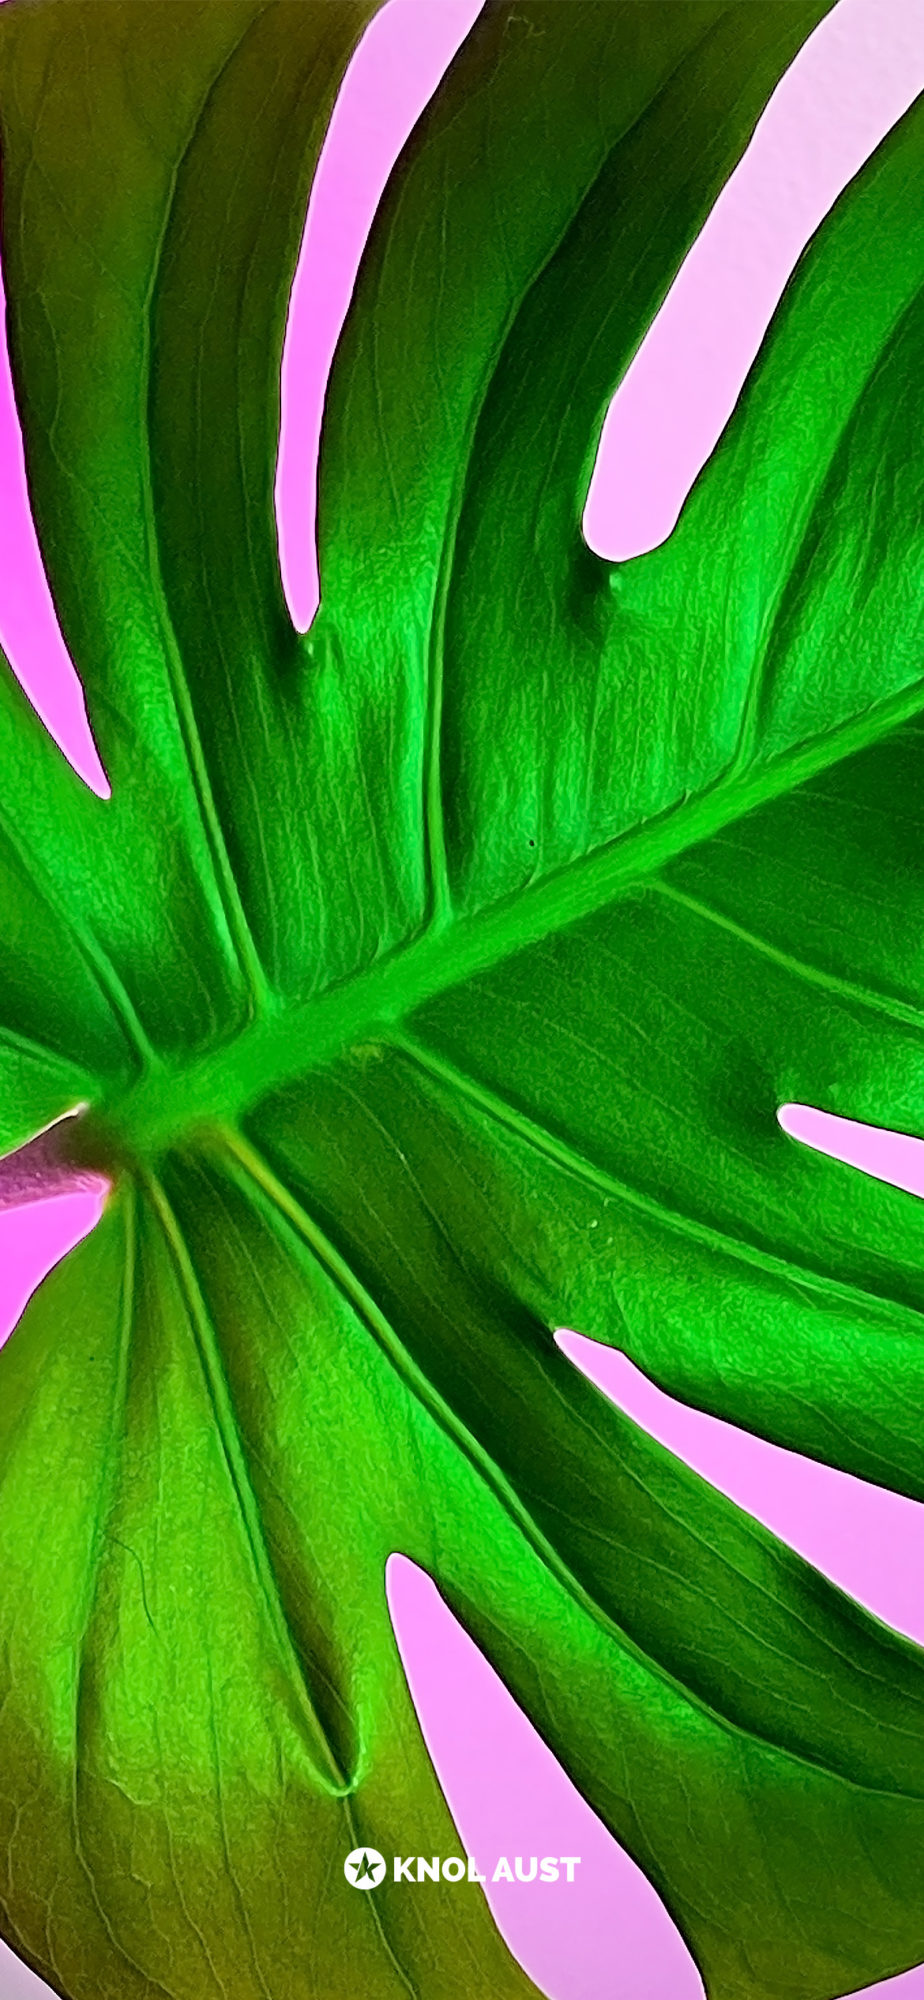 Photo of a monstera delicosa with a magenta background made for smartphone devices